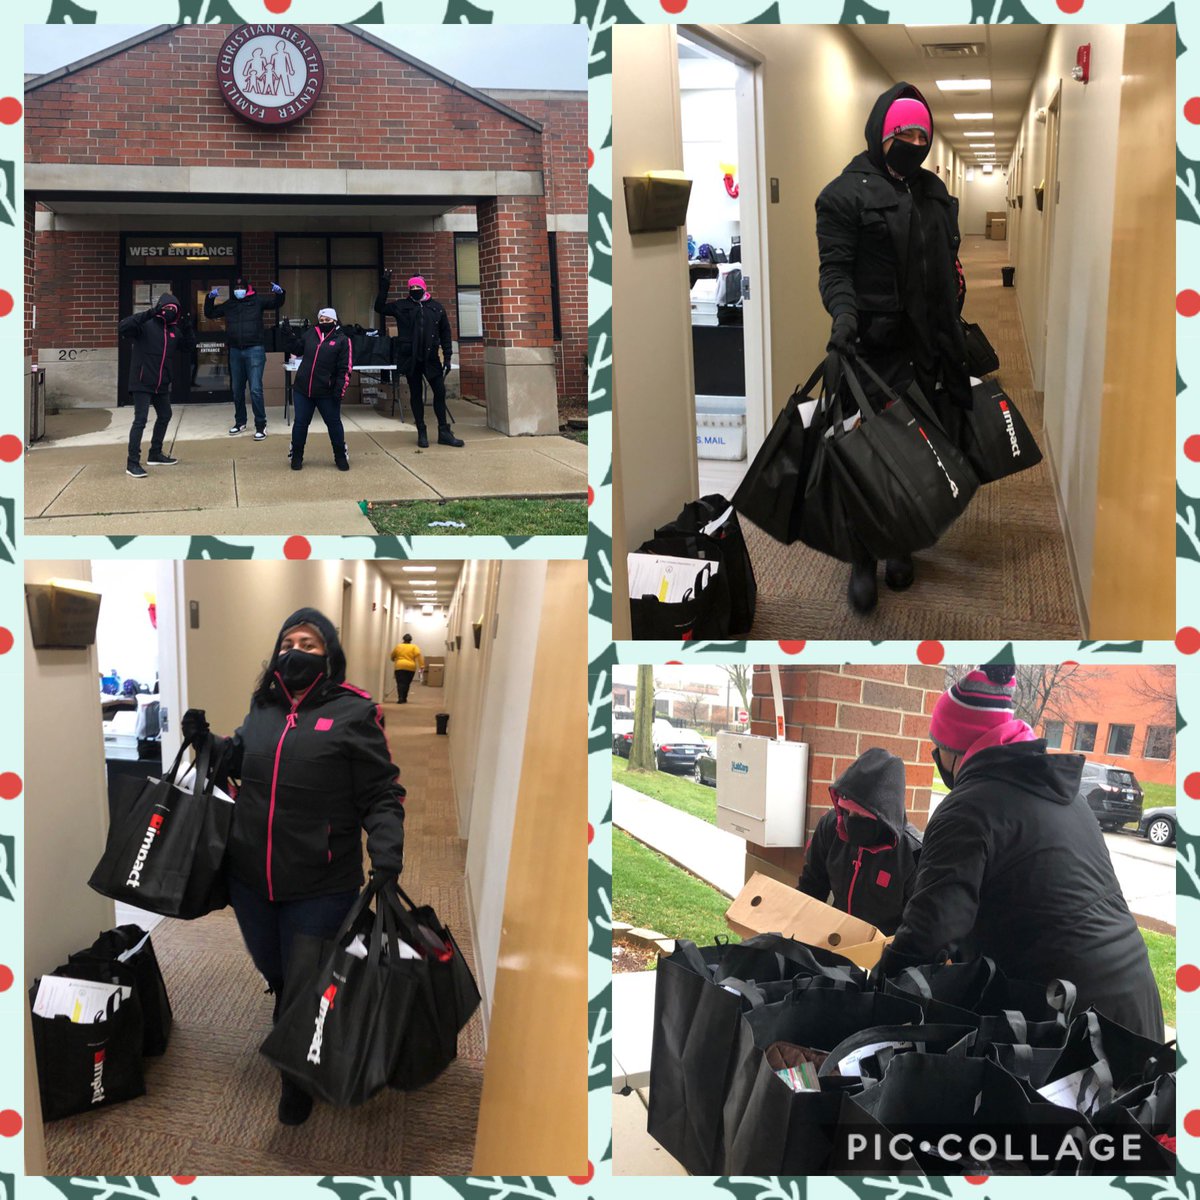 Today @TmobileTruckCHI was honored to #giveback. We partnered with Family Christian Health Center and helped pass out 50 Turkey 🦃 Bags to those in Need. Huge shout out to my team to deliver in the cold/rain! You guys rock! #wearewithyou #communitygiveback #trucklife